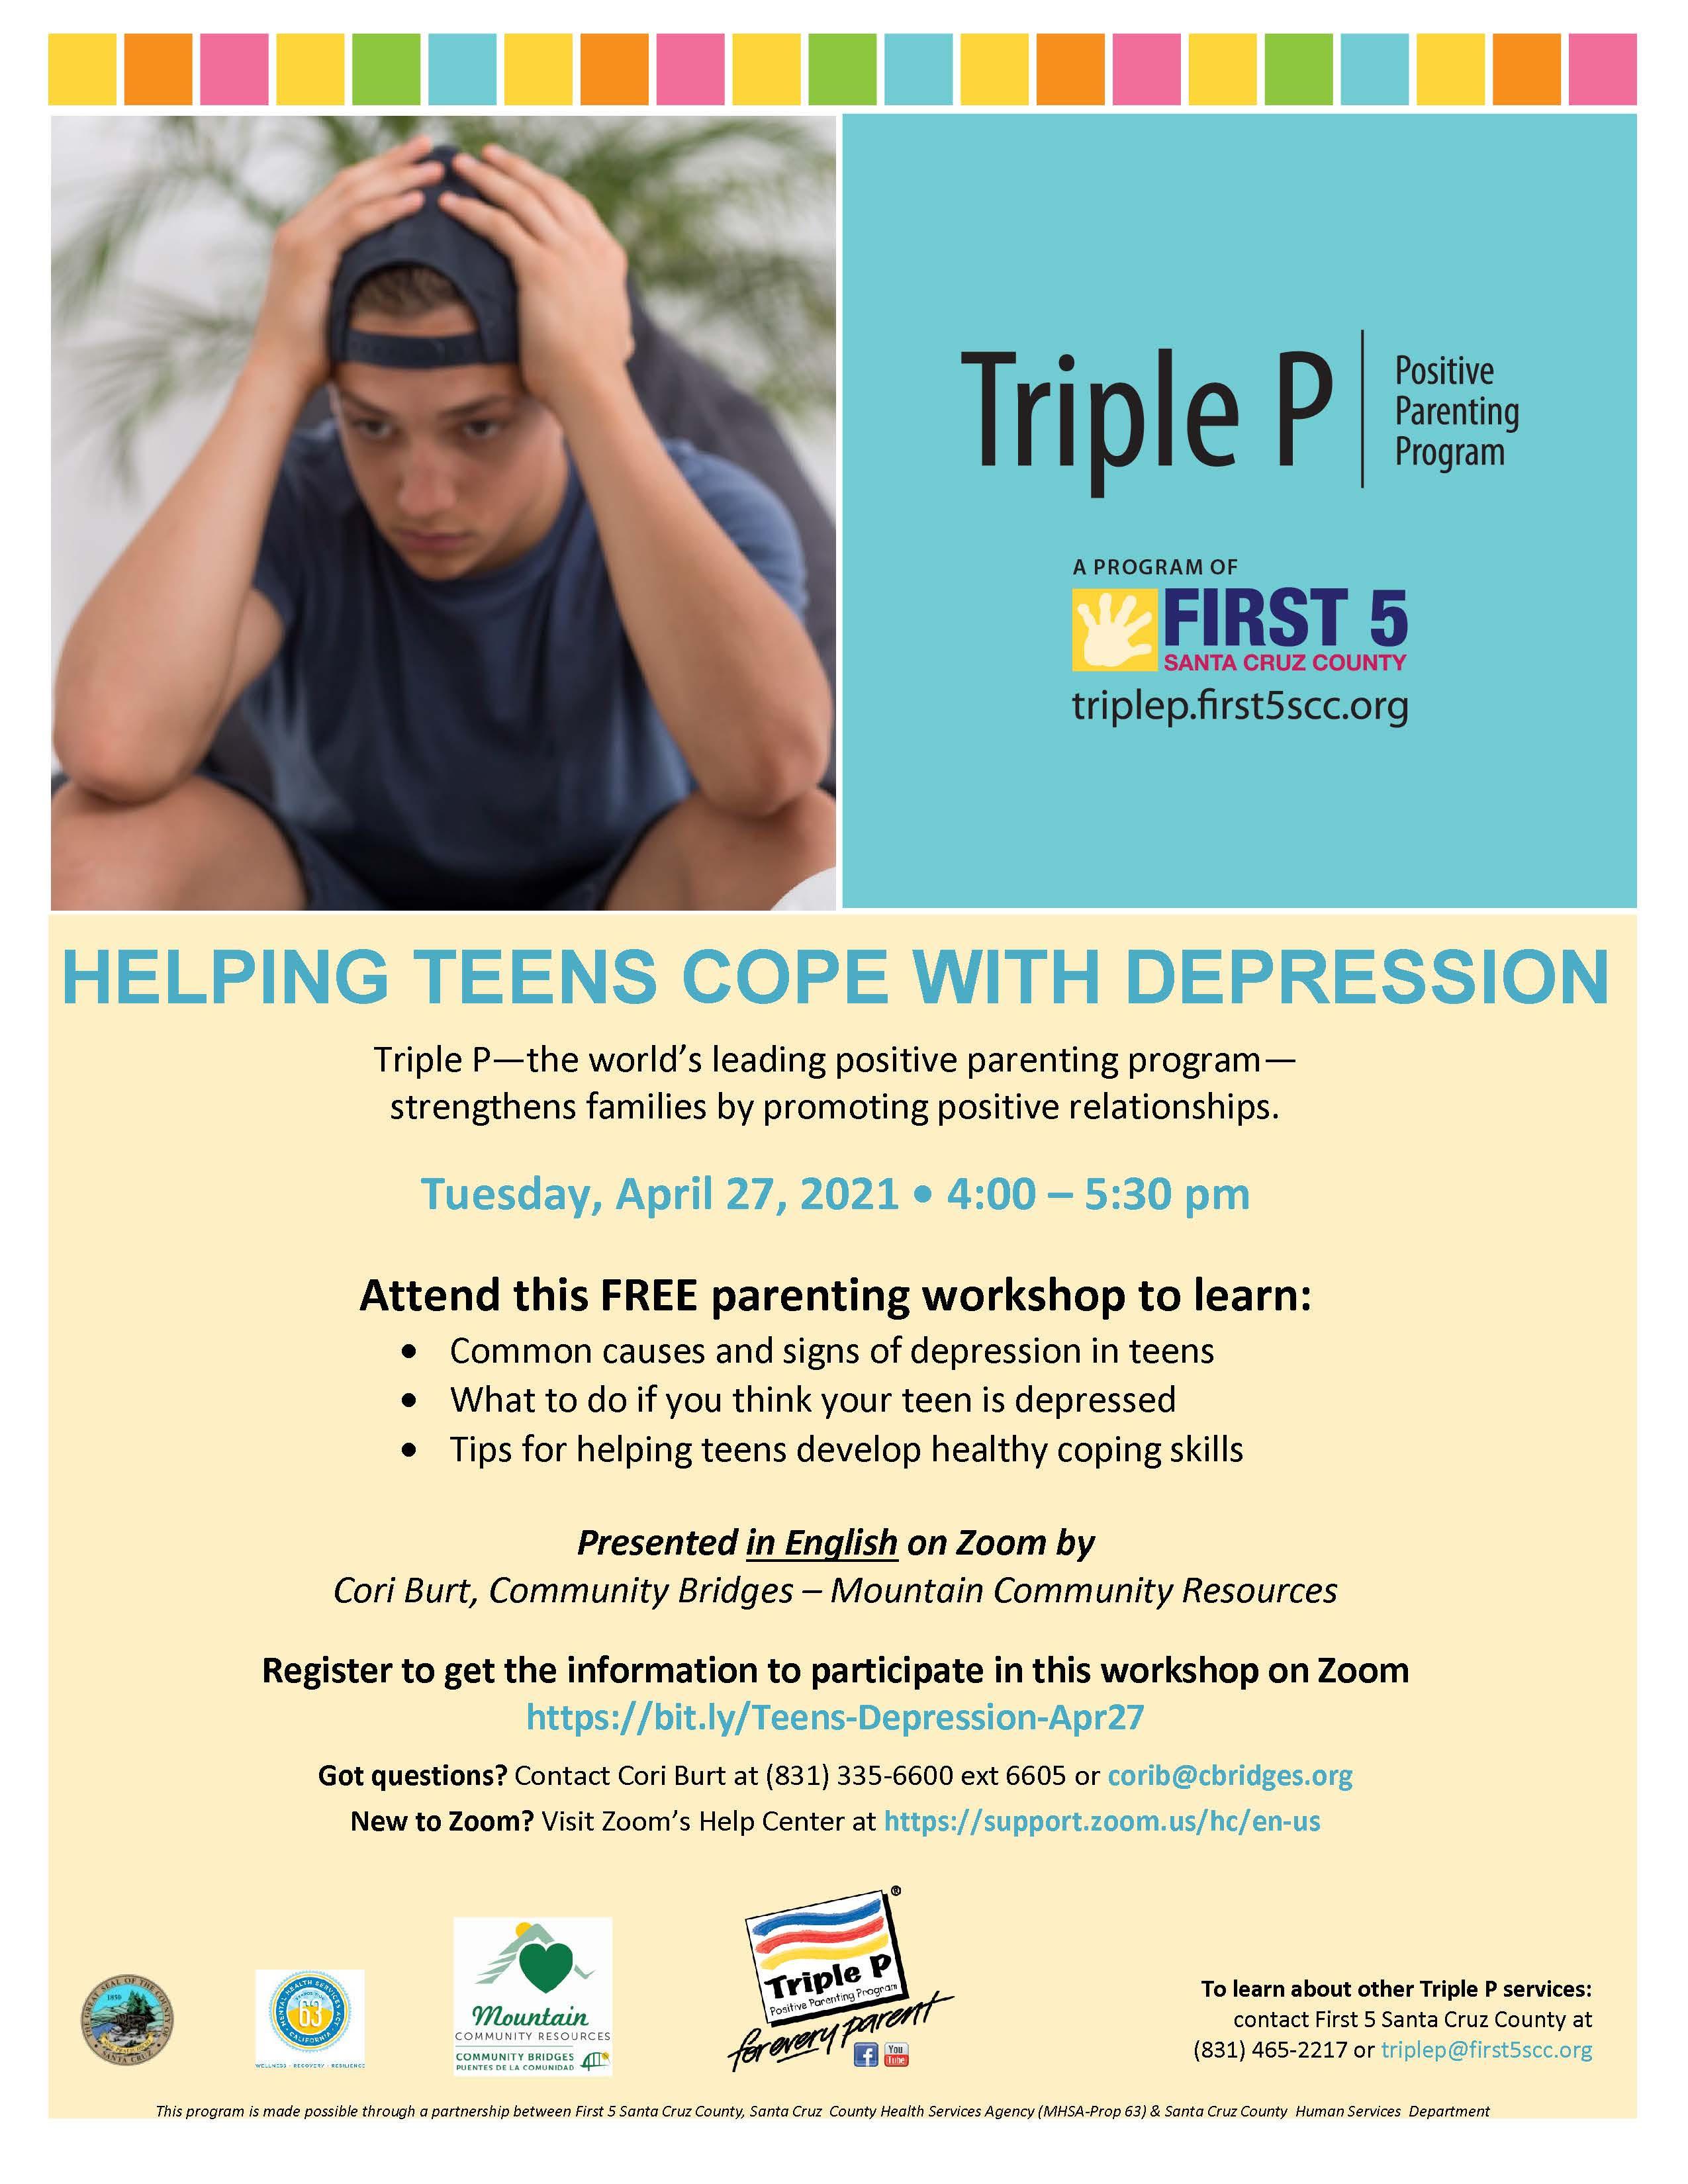 helping teens cope with depression workshop; call 831-335-6600 for details